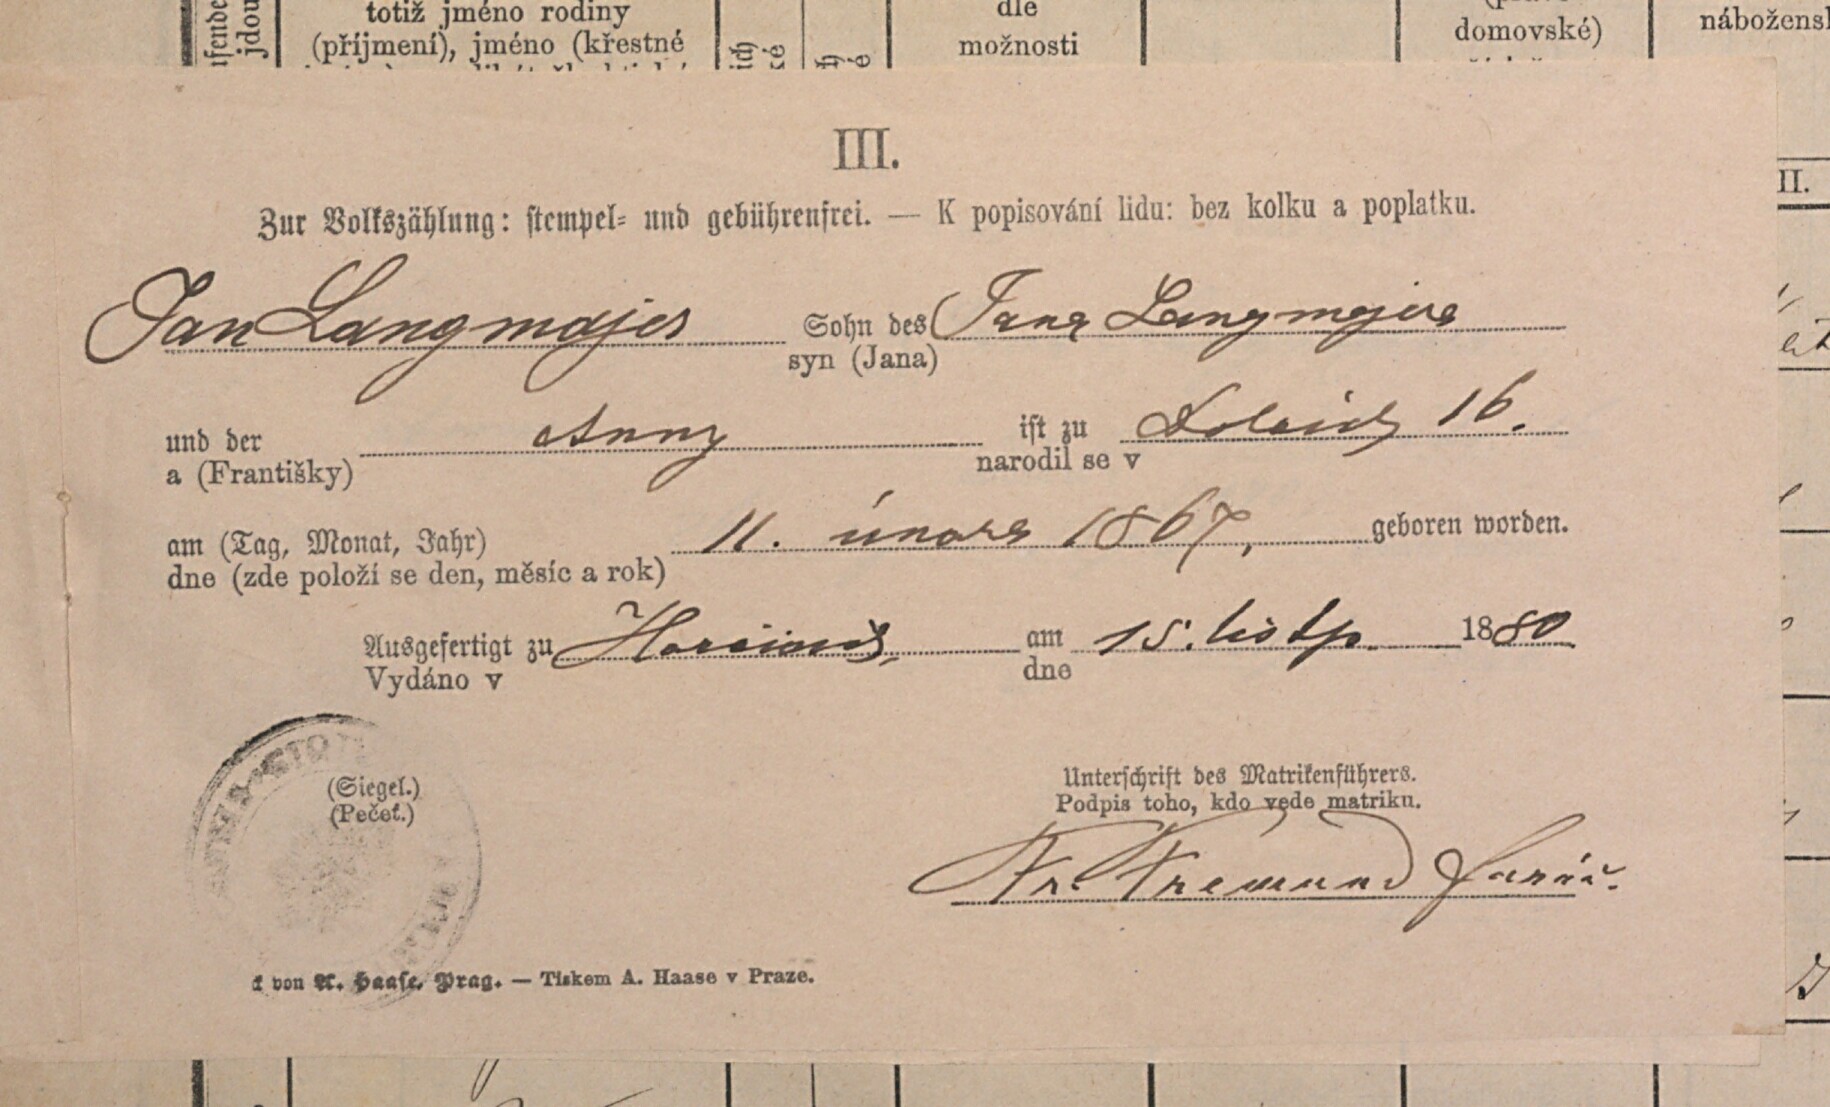 3. soap-pj_00302_census-1880-dolce-cp016_0030